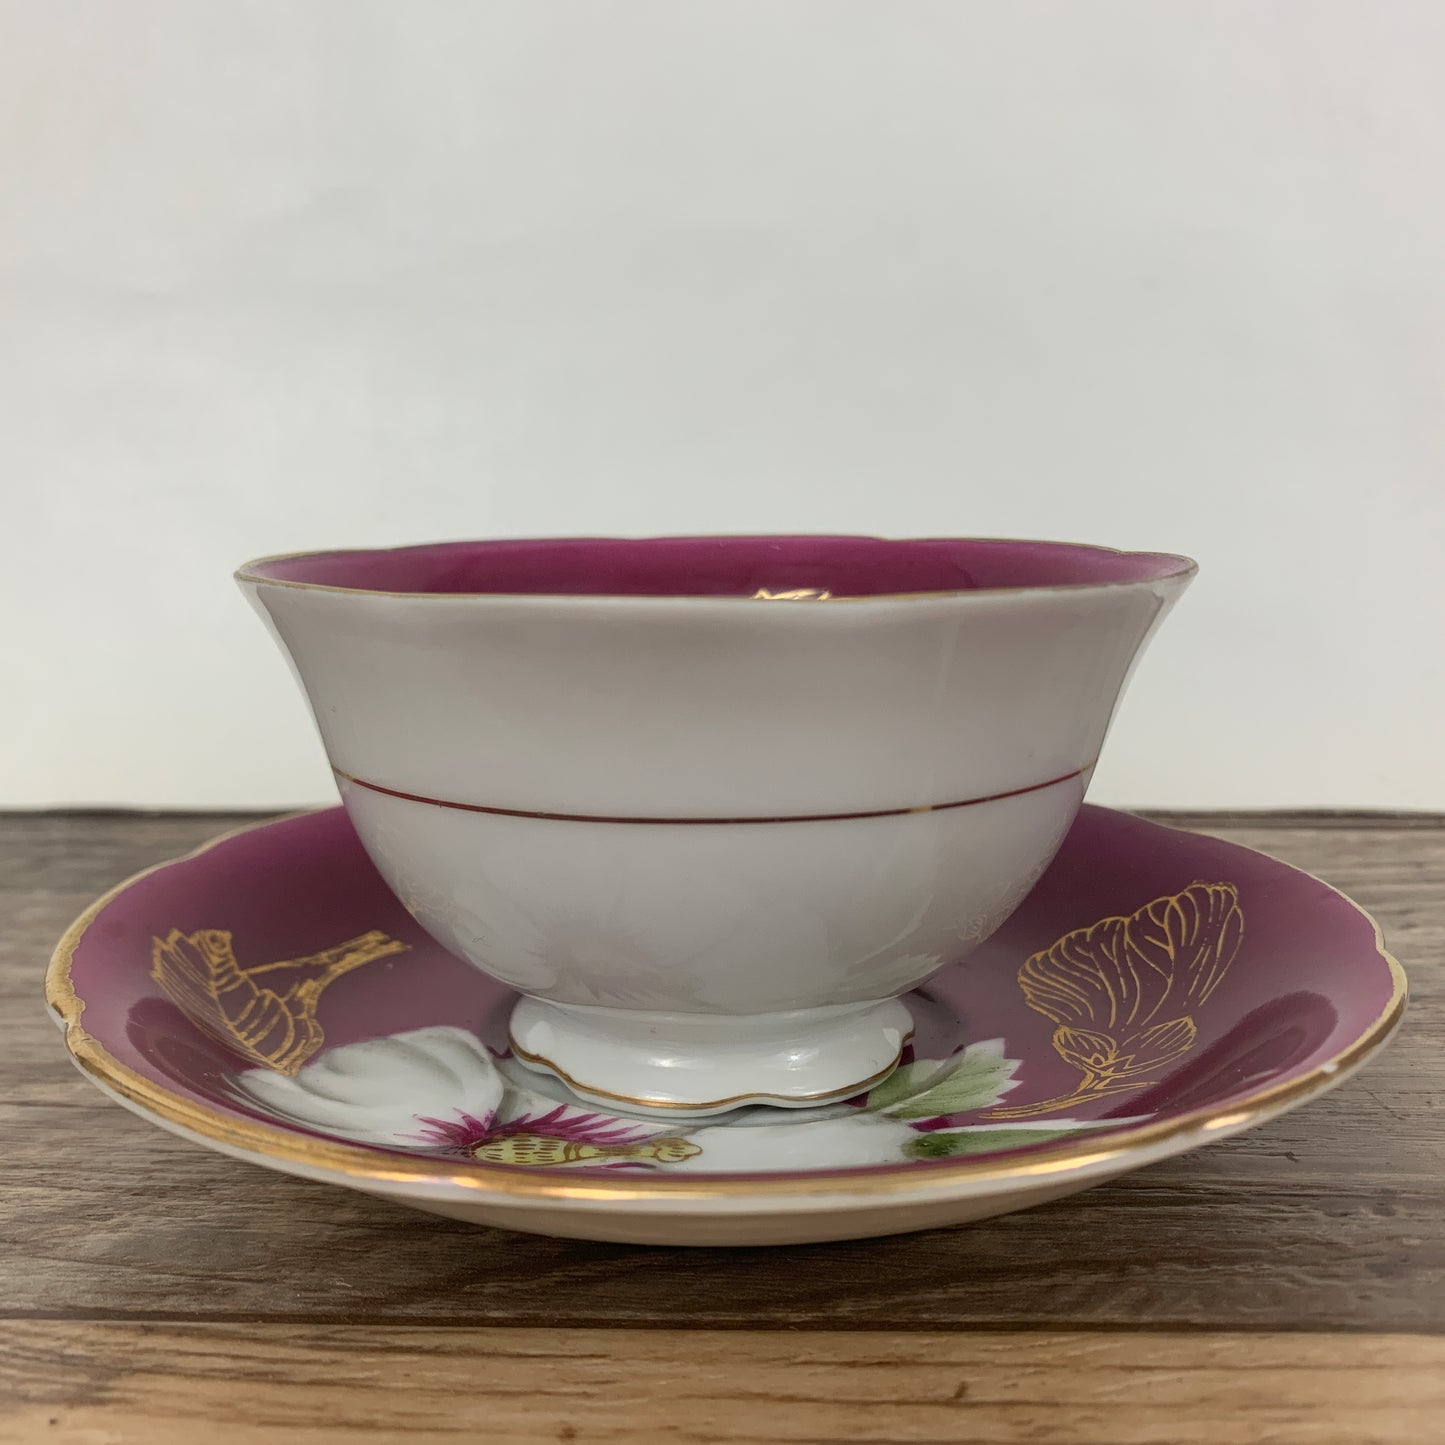 Maroon Teacup and Saucer with Hand Painted Flower Occupied Japan Teacup and Saucer